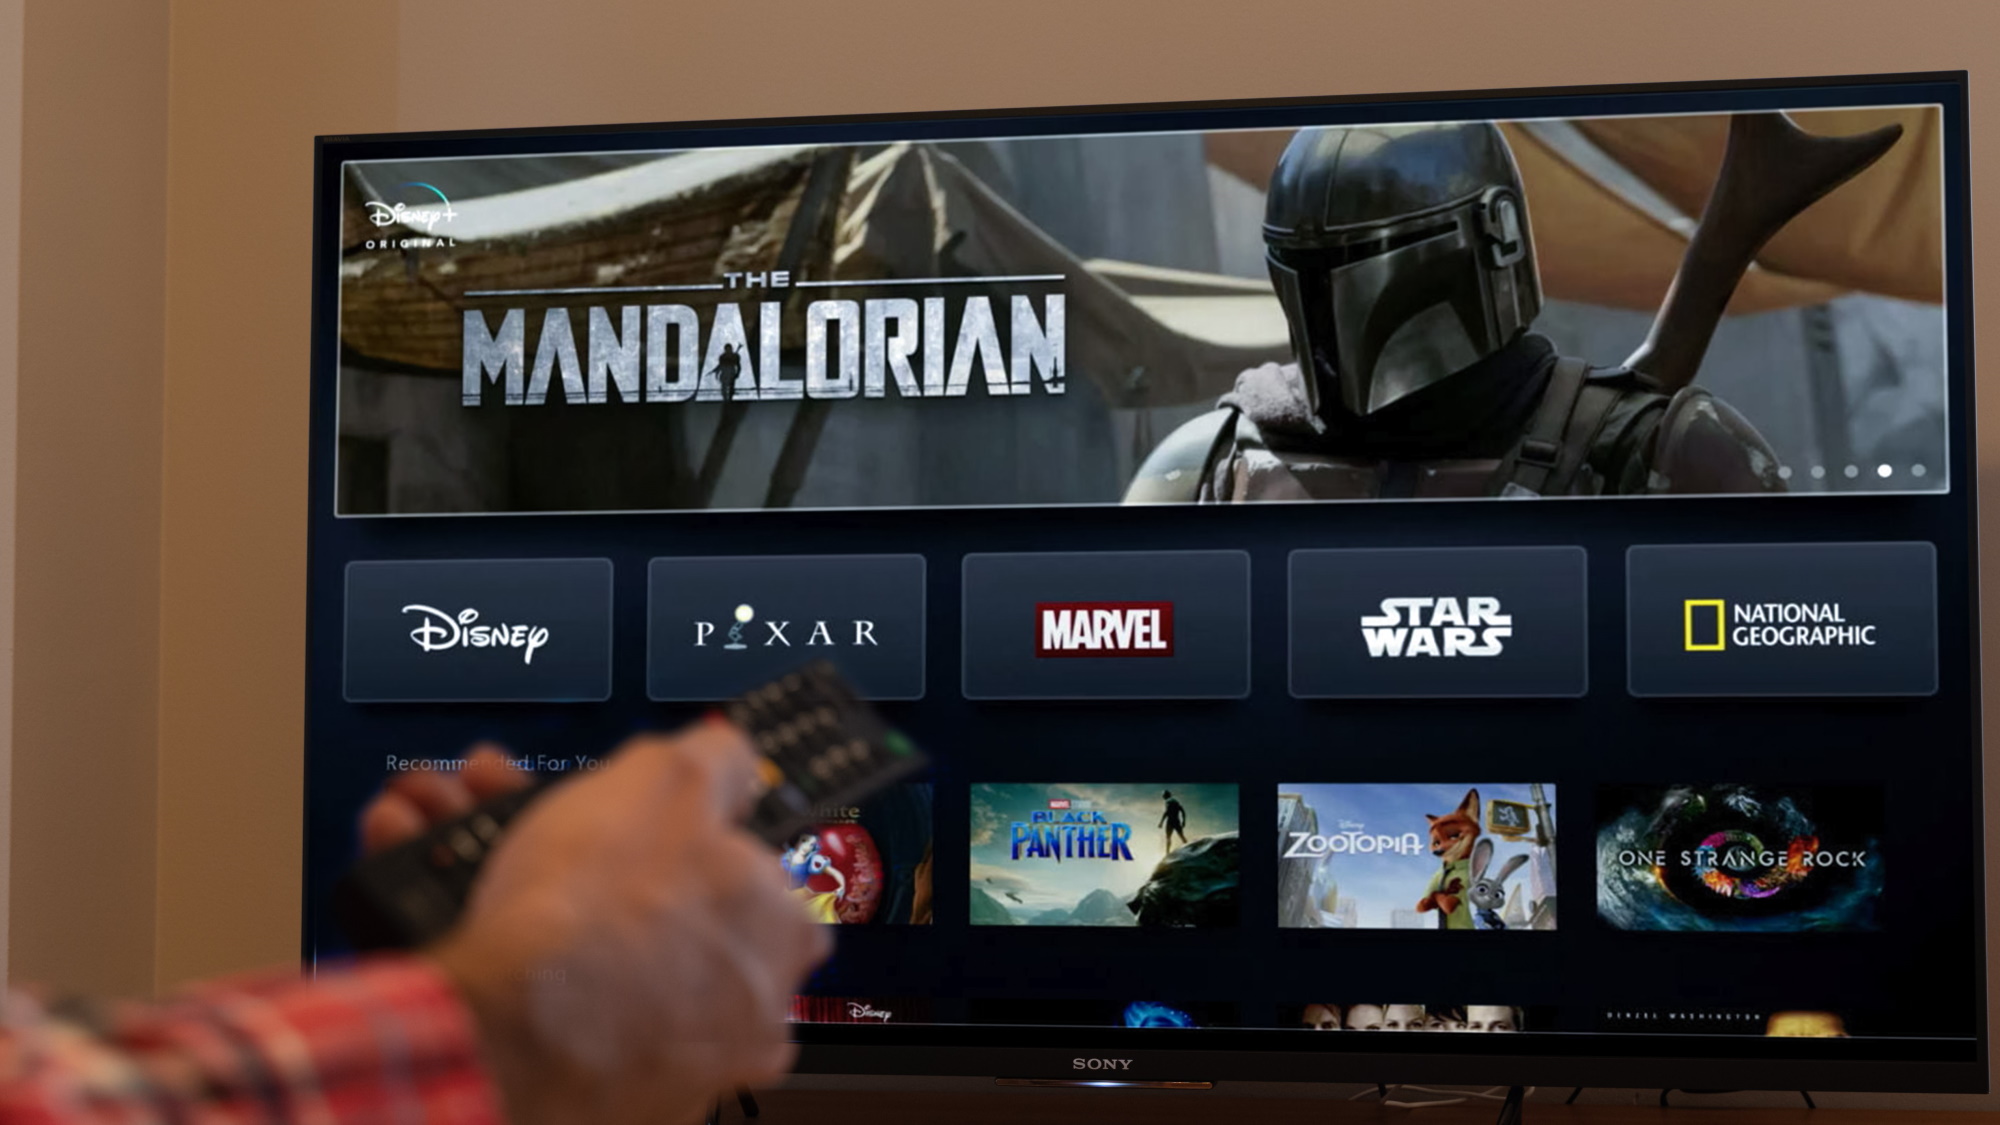 Disney Plus 4K Review: Is It True and How to Get It?